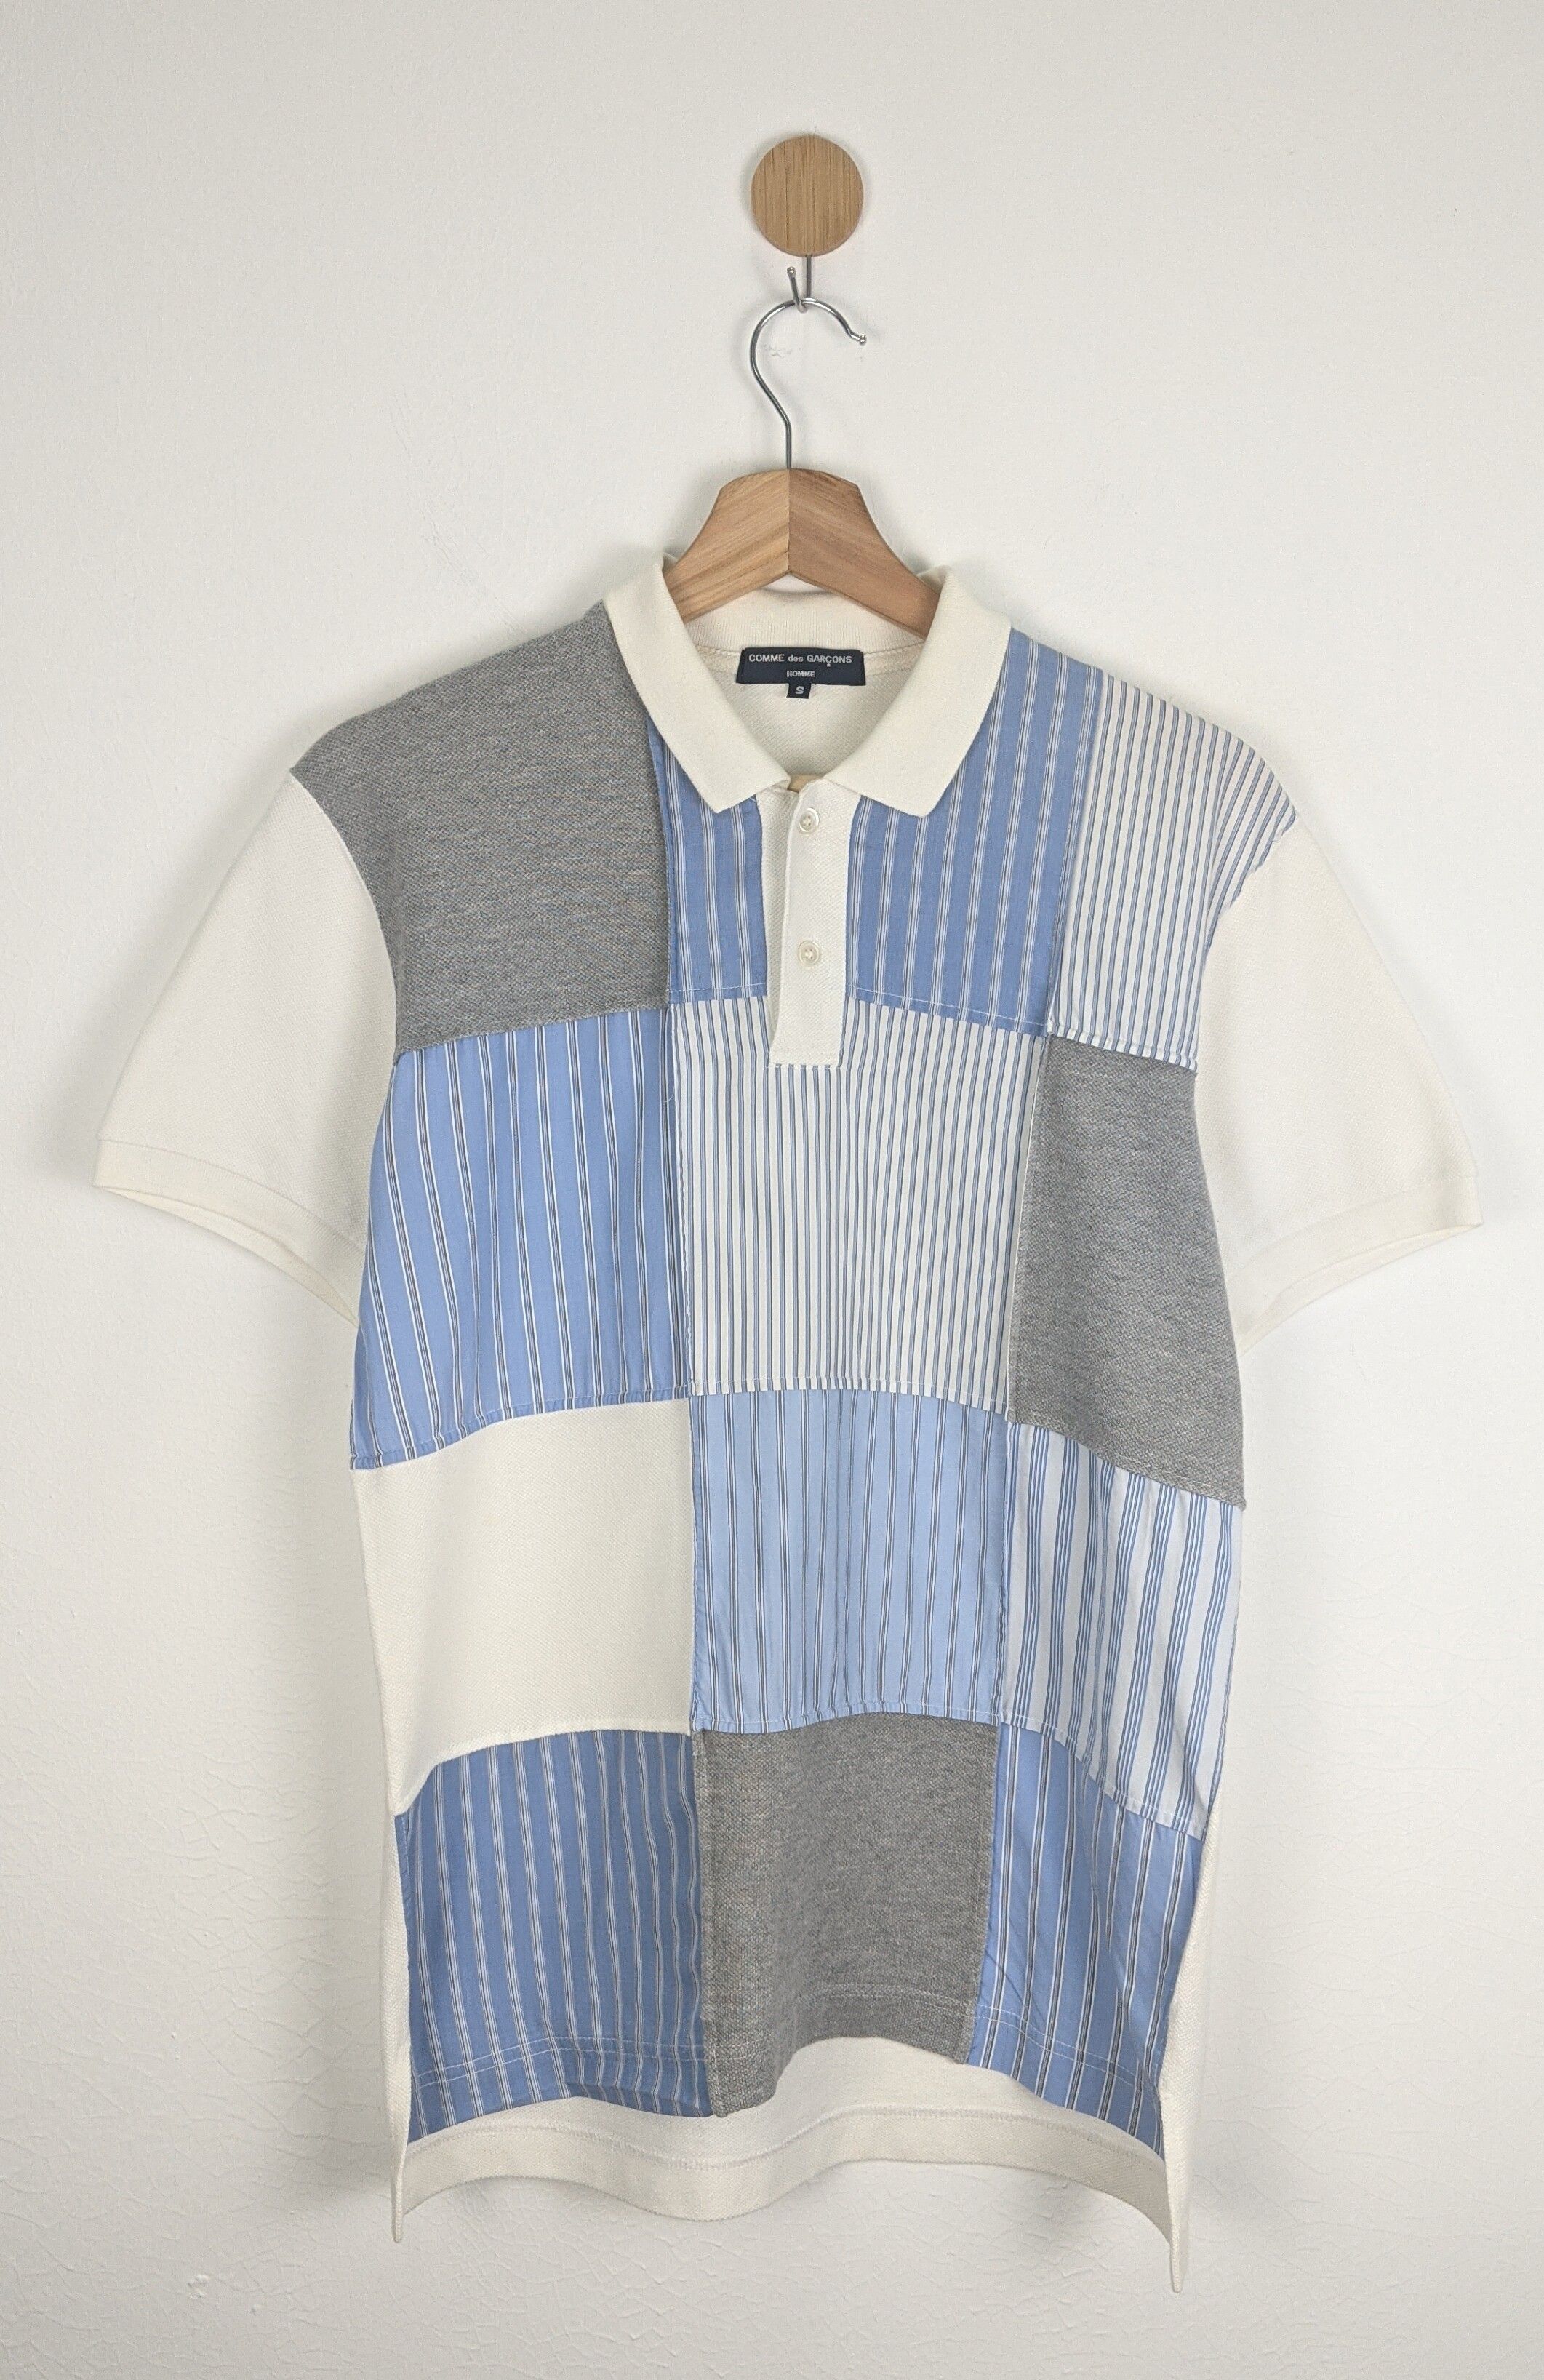 Comme des Garcons CDG Patchwork Polo AD 2008 shirt - 1